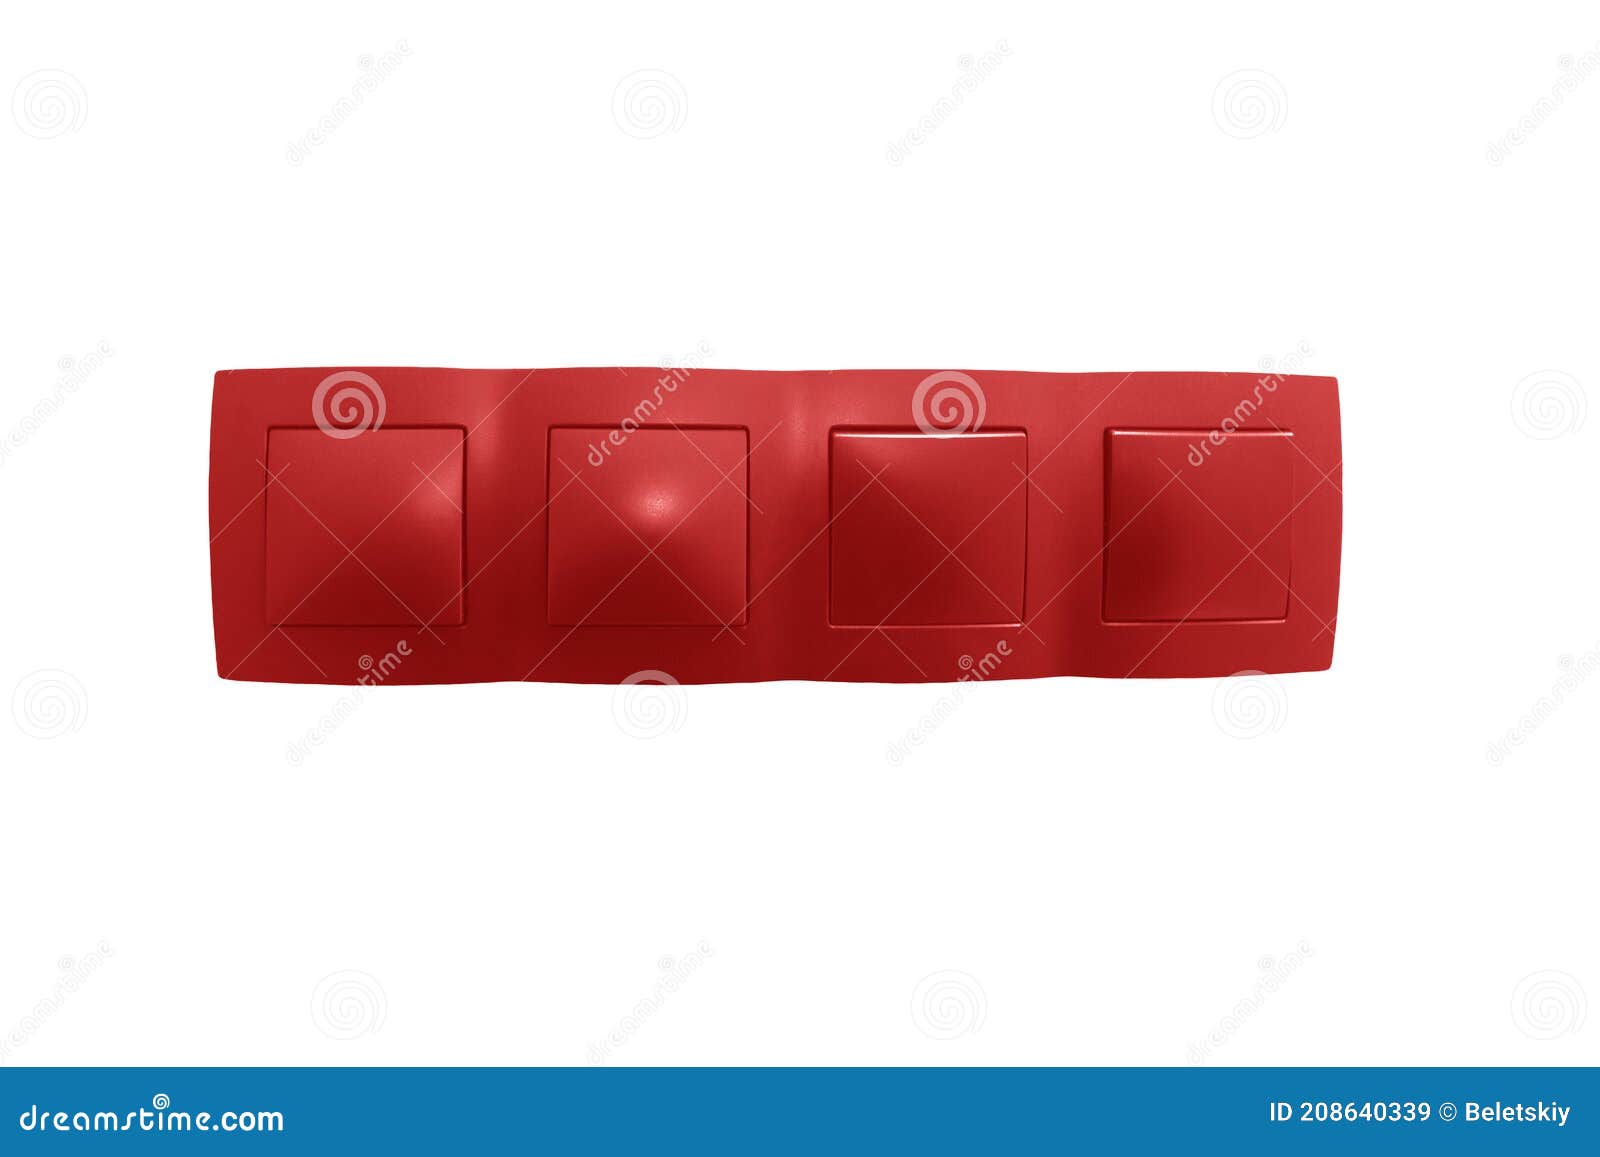 Electrical switches, four red, household switches isolated on white background. Electrical switches, four red, household switches, in a frame isolated on a white background